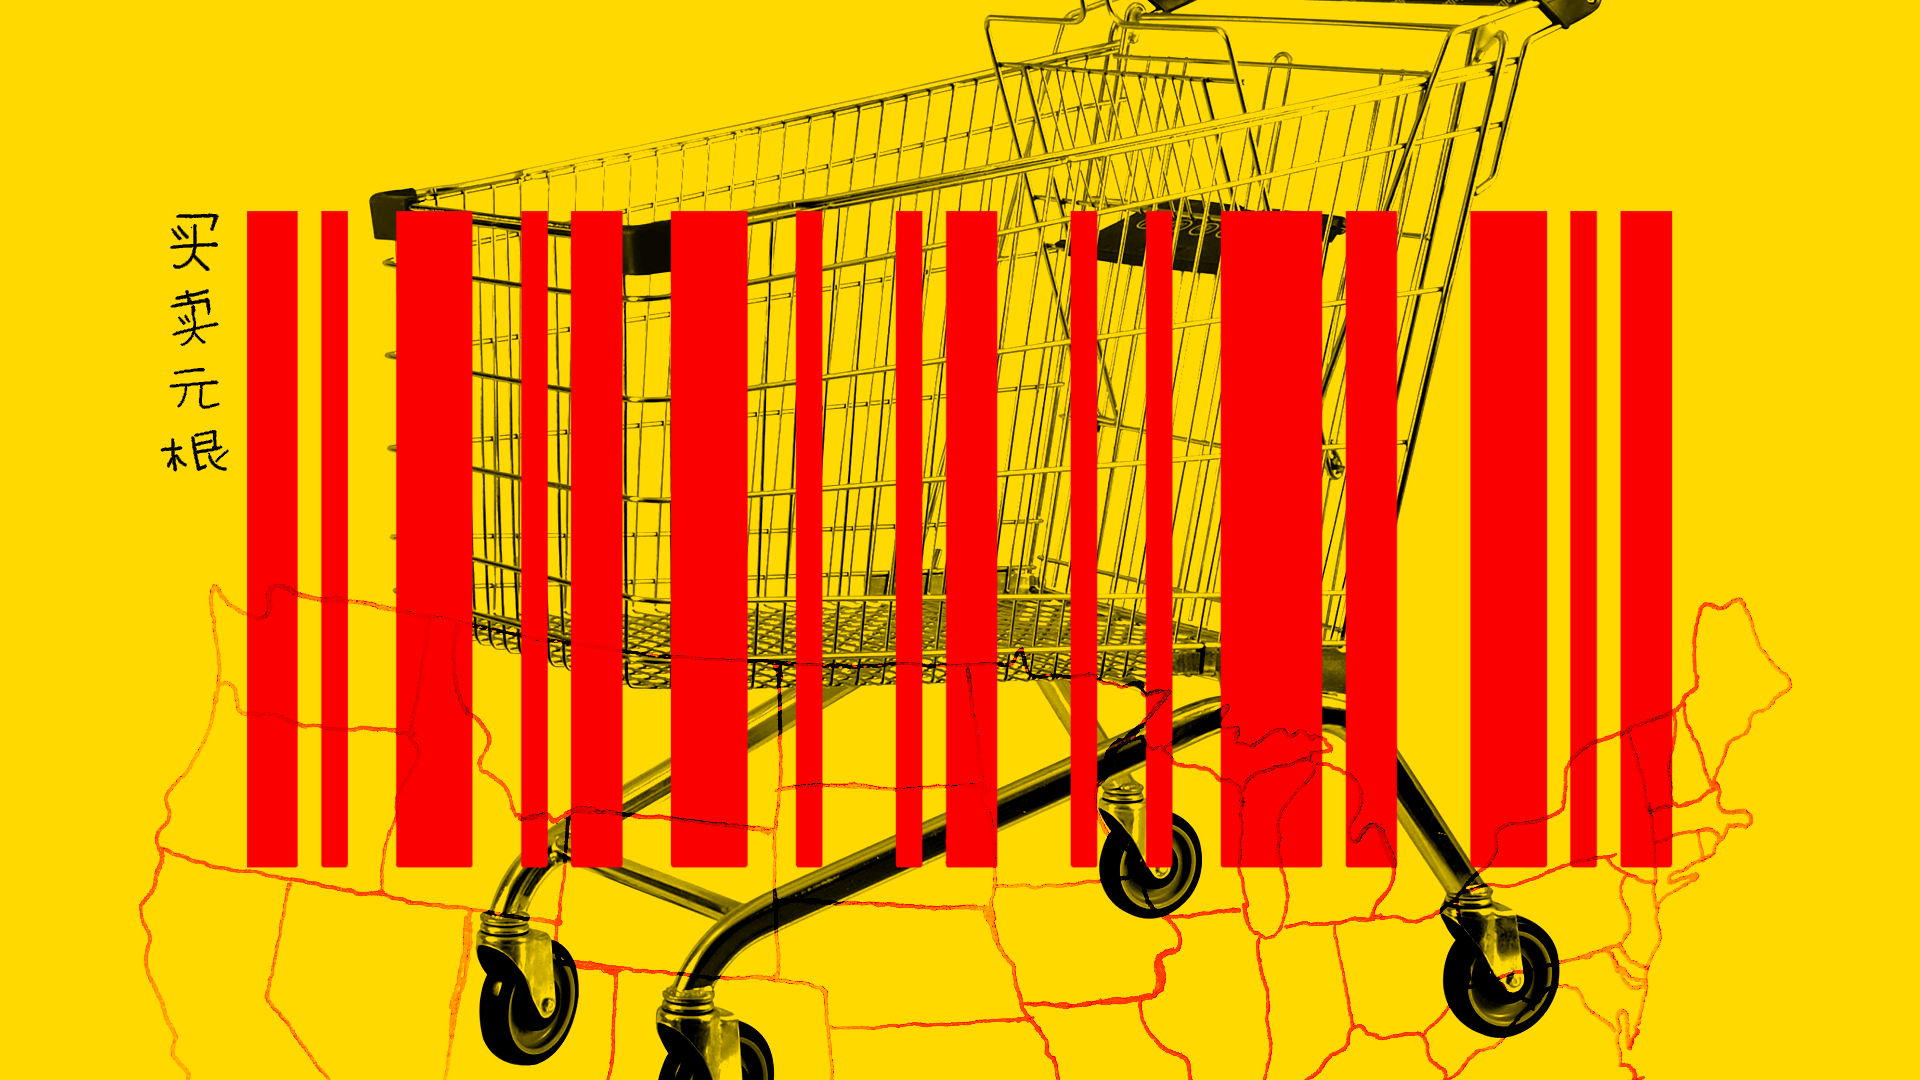 A shopping cart with a bar code looking like the Chinese flag